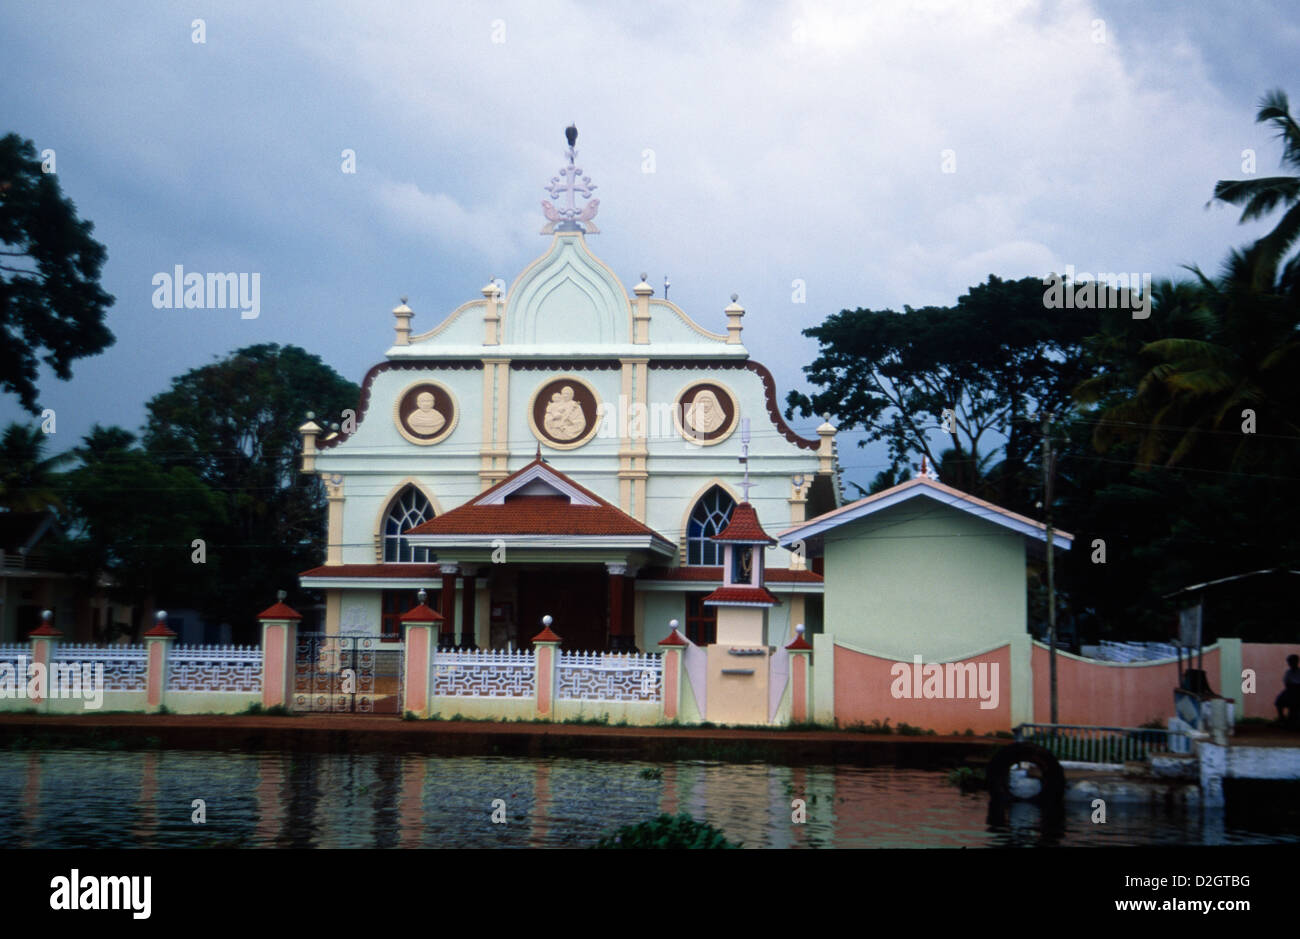 Kerala India Pathiramanal A Small Island Located On The Border Of Kottayam In Alapuzha District Church Is Associated With The Blessed Kuriacose Located By Lake Vembanad Stock Photo